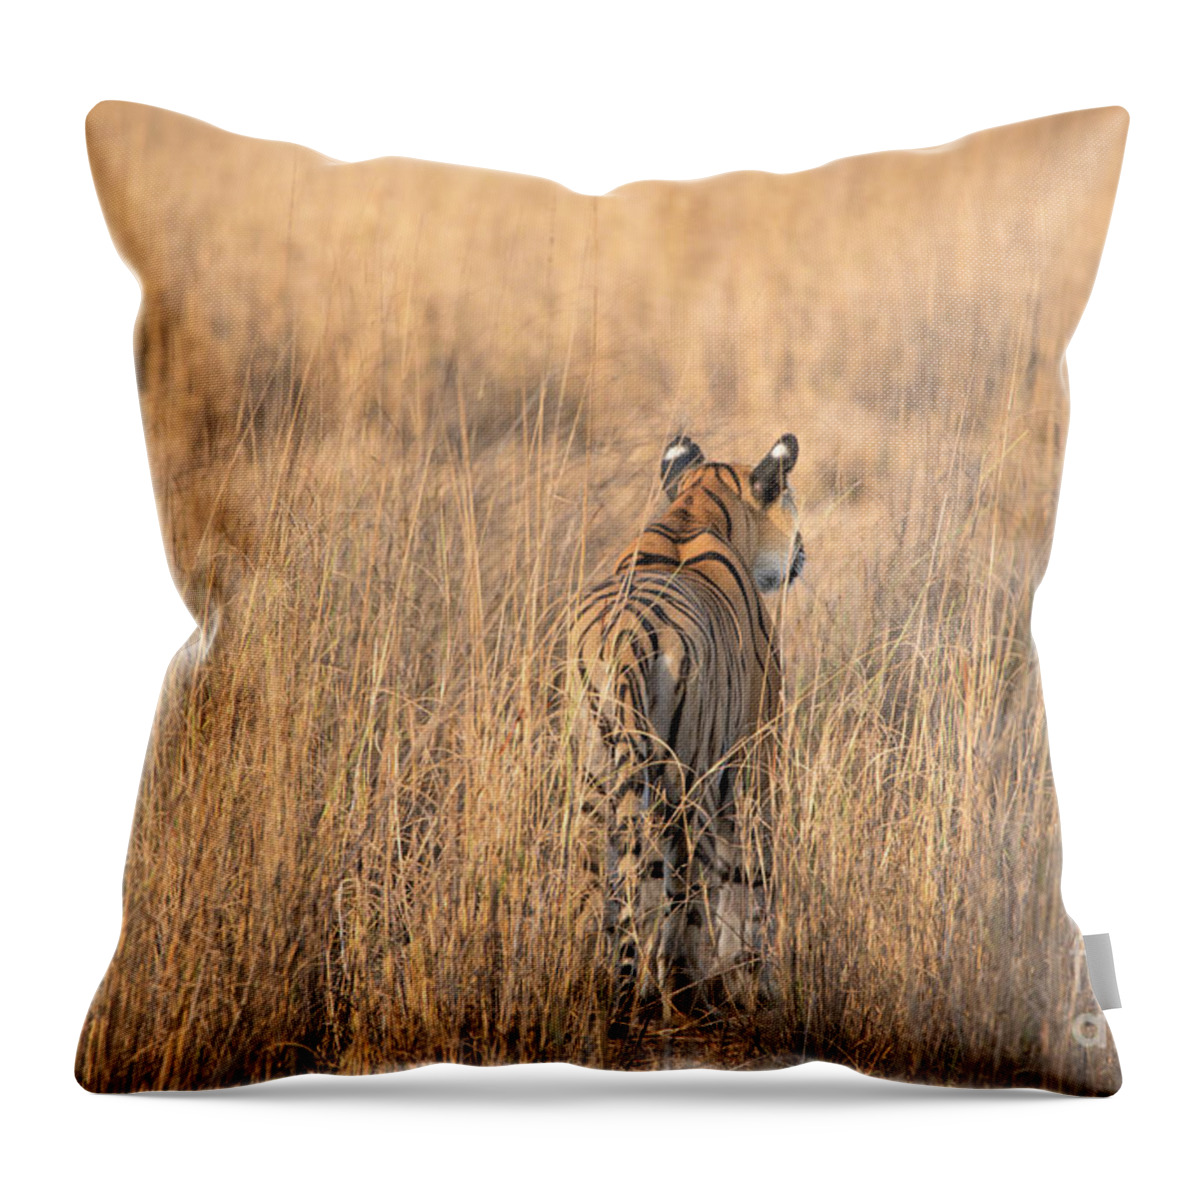 Tiger Throw Pillow featuring the photograph On the Prowl by Pravine Chester